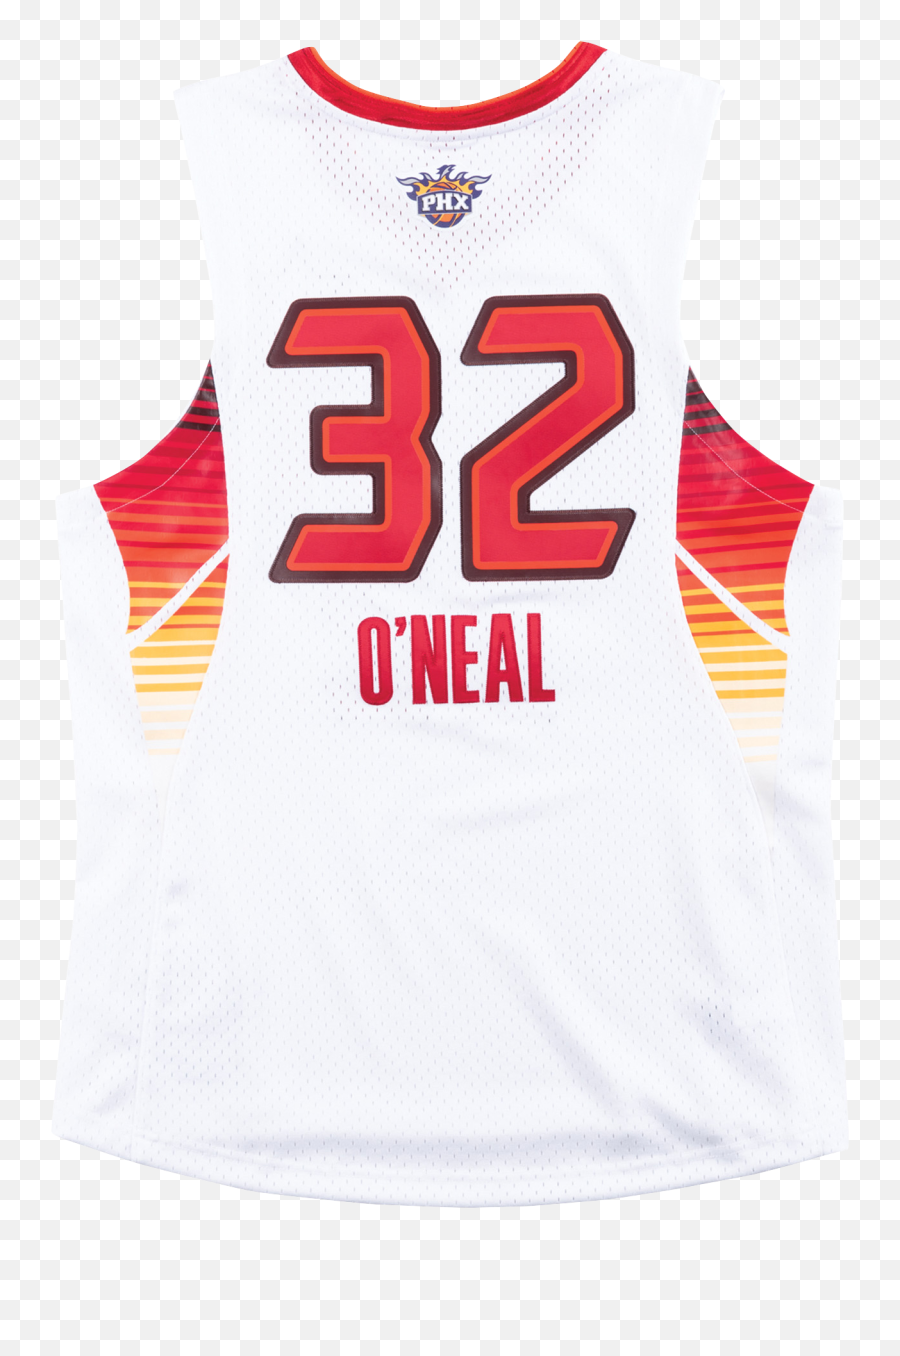 Swingman Jersey All Star West 09 Shaquille Ou0027neal Emoji,Shaquille O'neal Png